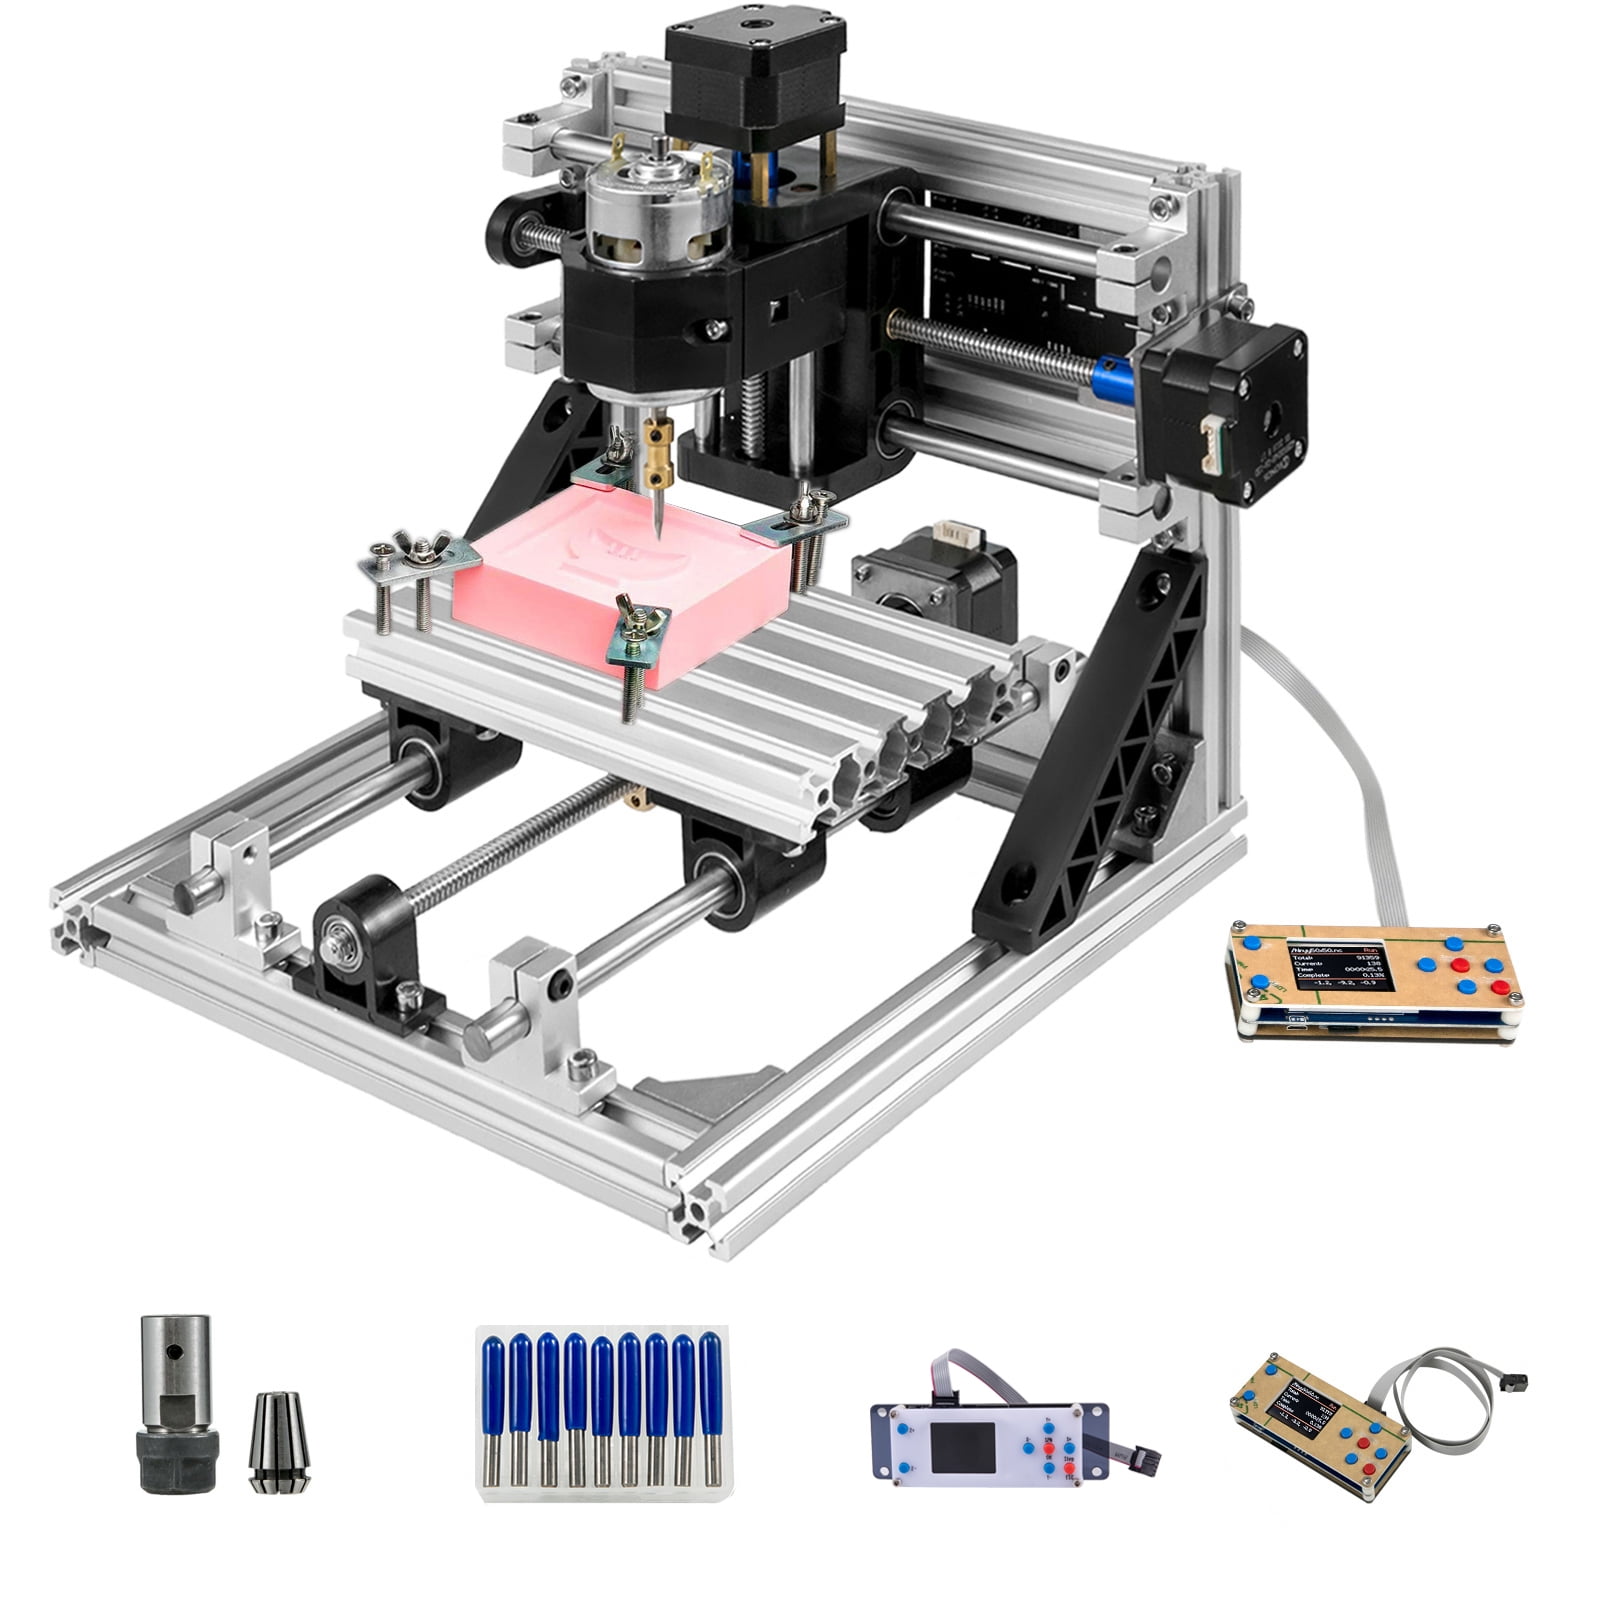 XYZ Working Area 160x100x45mm CNC Router Machine By Beauty Star DIY CNC Router Kits 1610 GRBL Control 3 Axis Plastic Acrylic PCB PVC Wood Carving Milling Engraving Machine